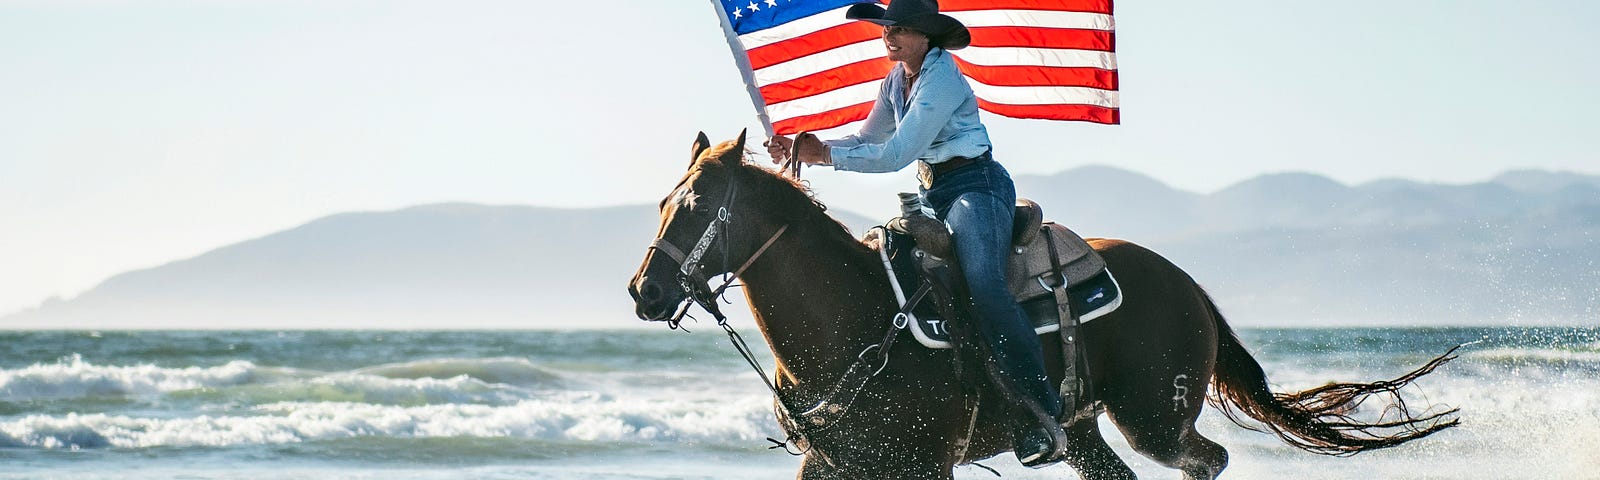 Photo of a person on a horse galloping on the beach with an American flag.